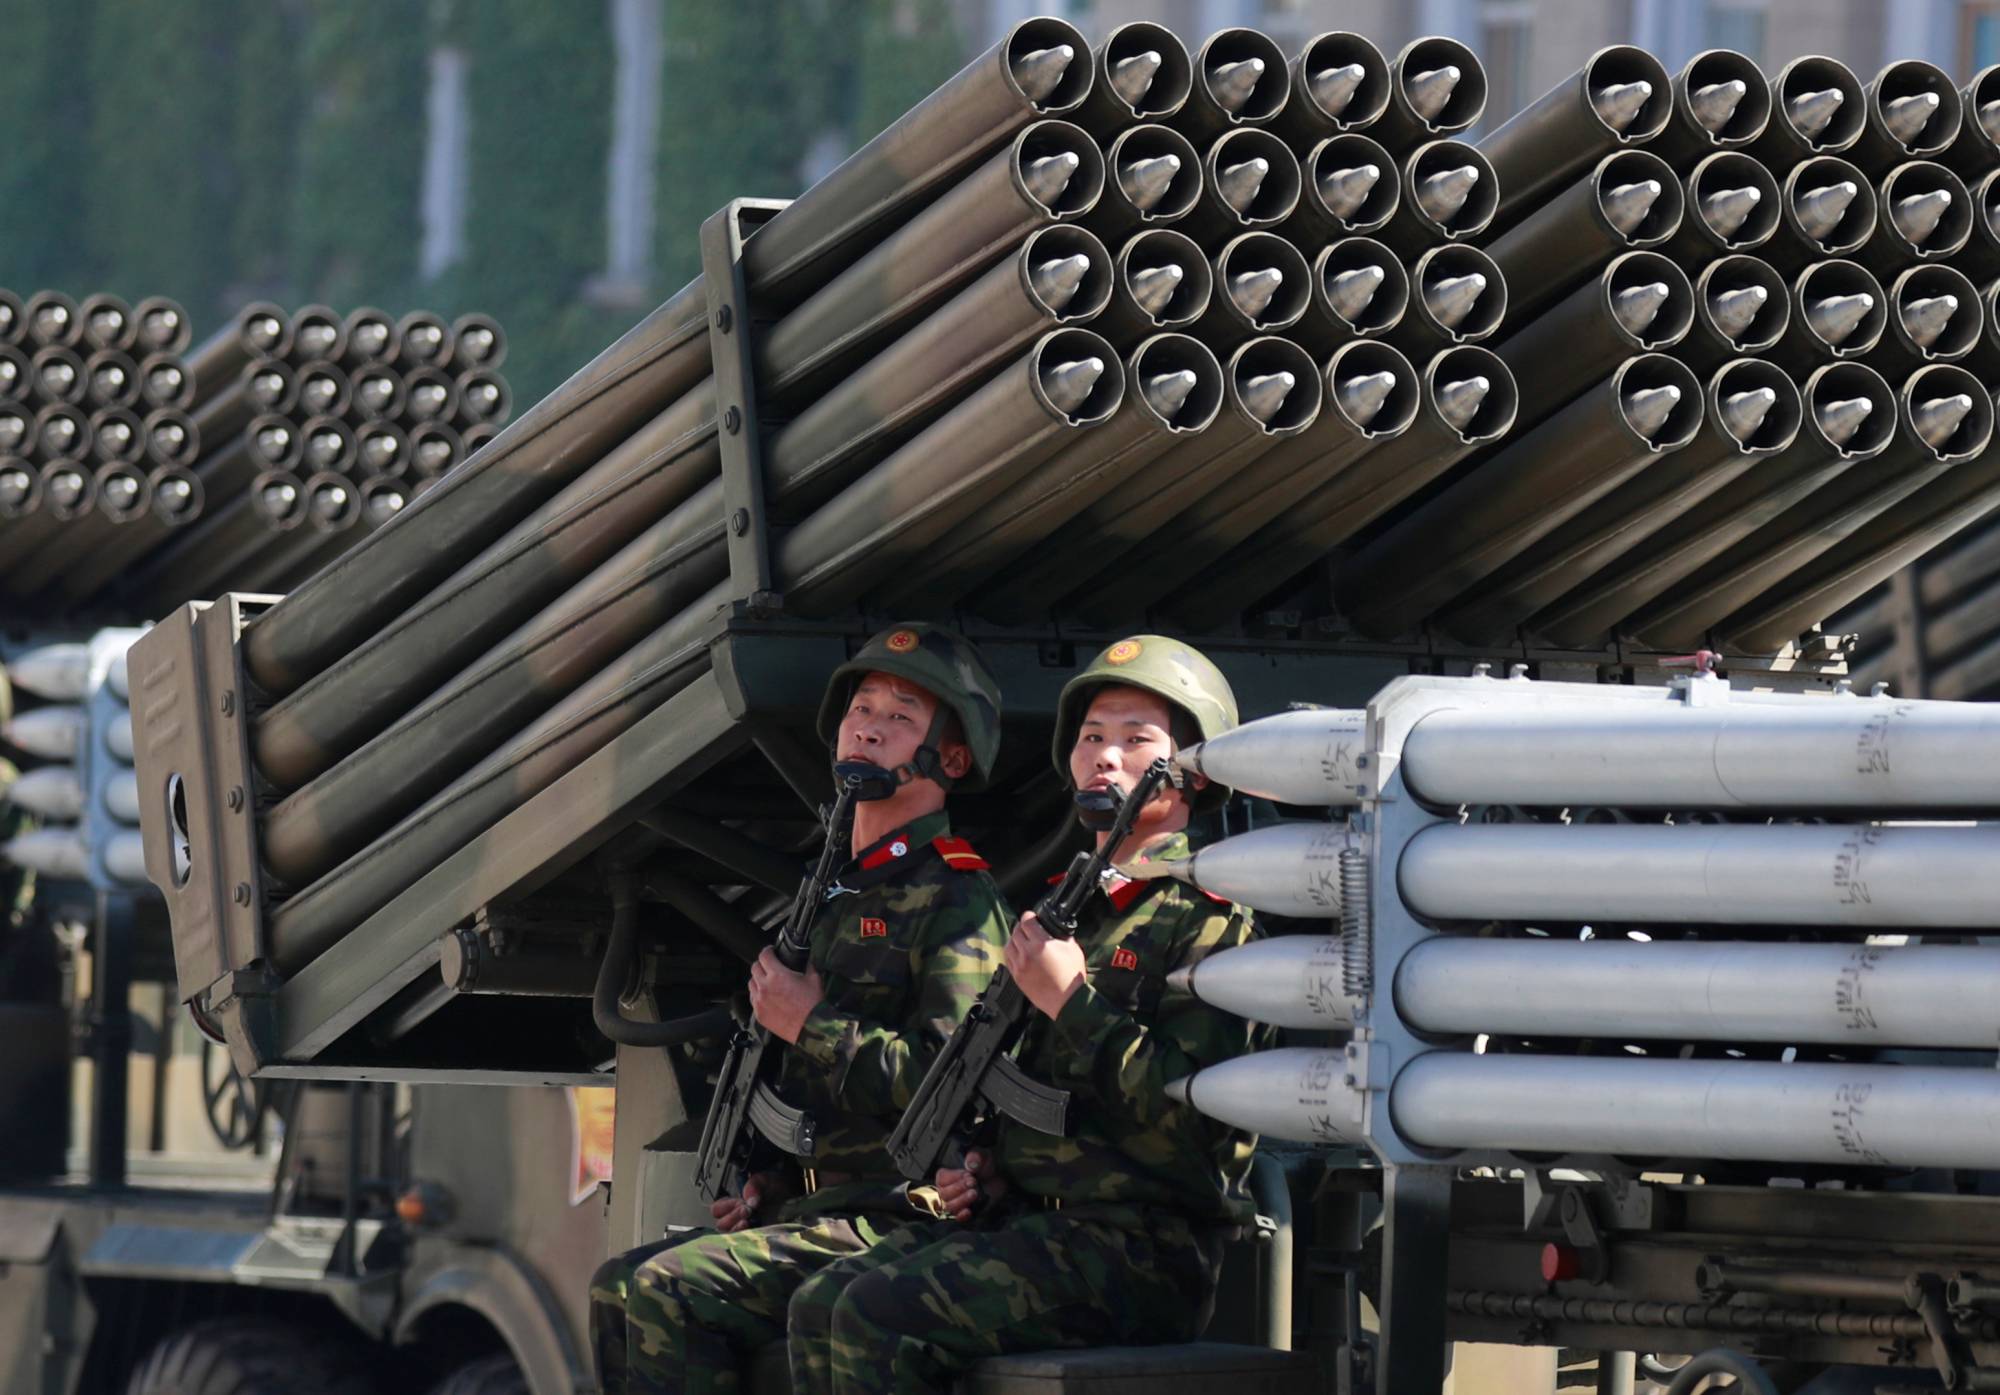 North Korea fires multiple rocket launcher days after 'failed